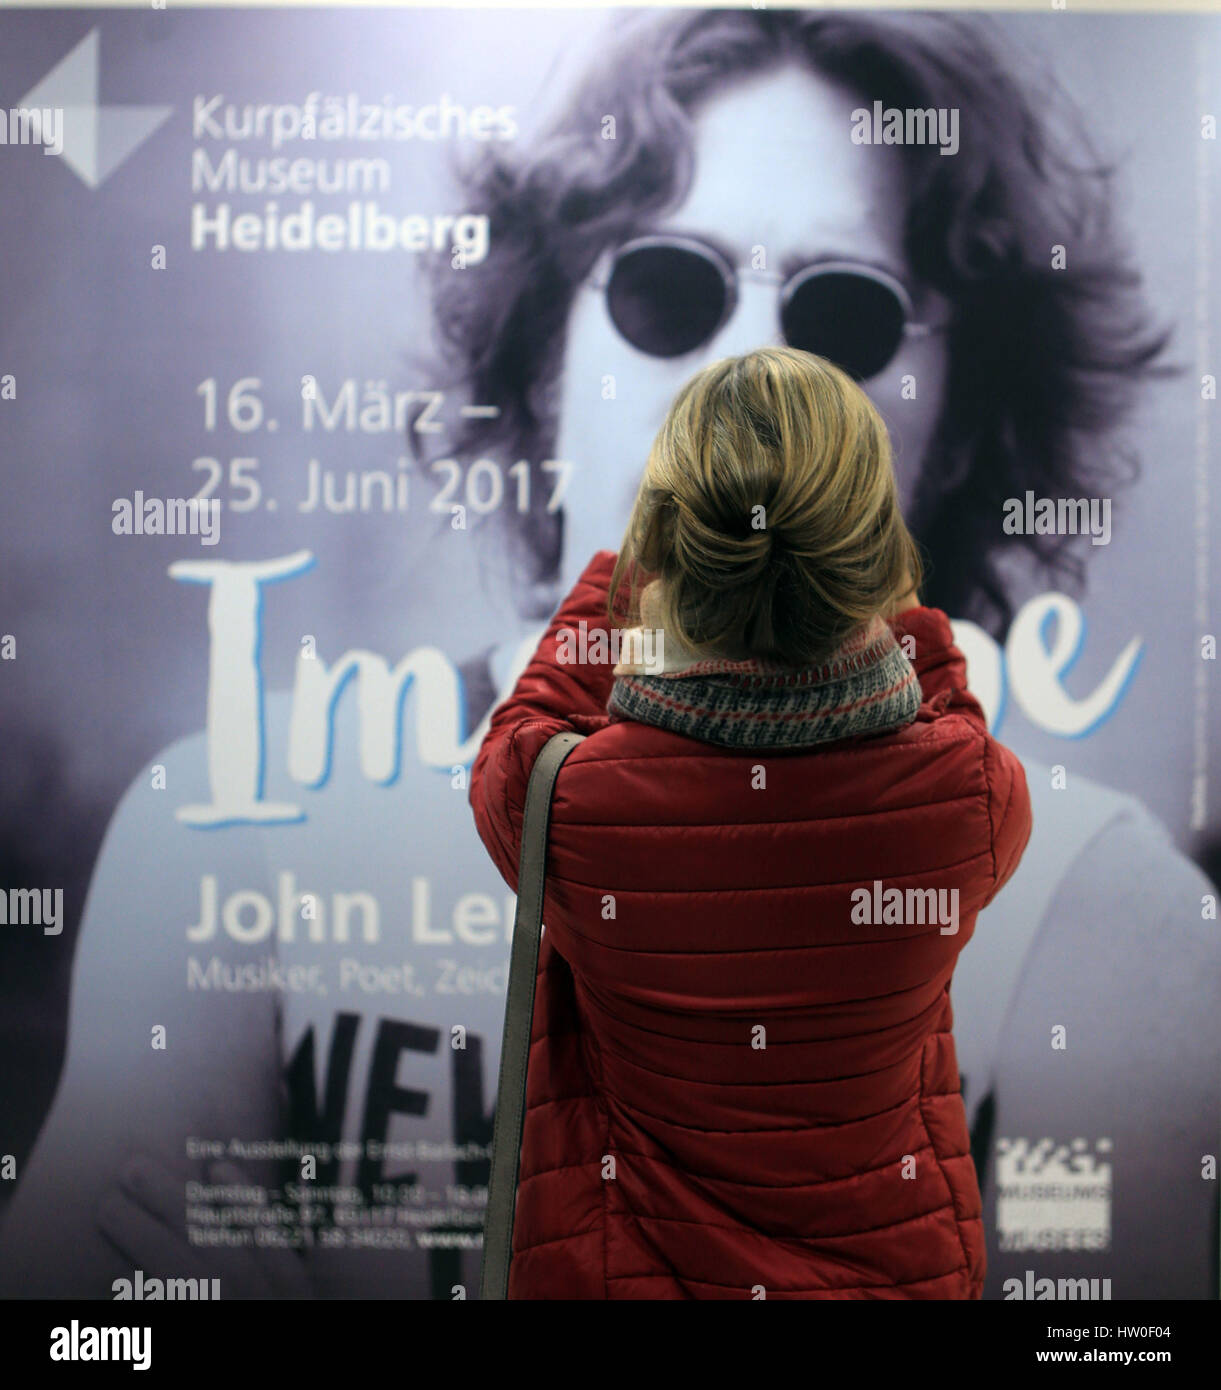 Heidelberg, March 15. 25th June, 2017. A woman visits the exhibition 'Imagine John Lennon' at the Kurpfaelzische Museum in Heidelberg, Germany, on March 15, 2017. Opened on Wednesday the exhibition will last to June 25, 2017. Credit: Luo Huanhuan/Xinhua/Alamy Live News Stock Photo